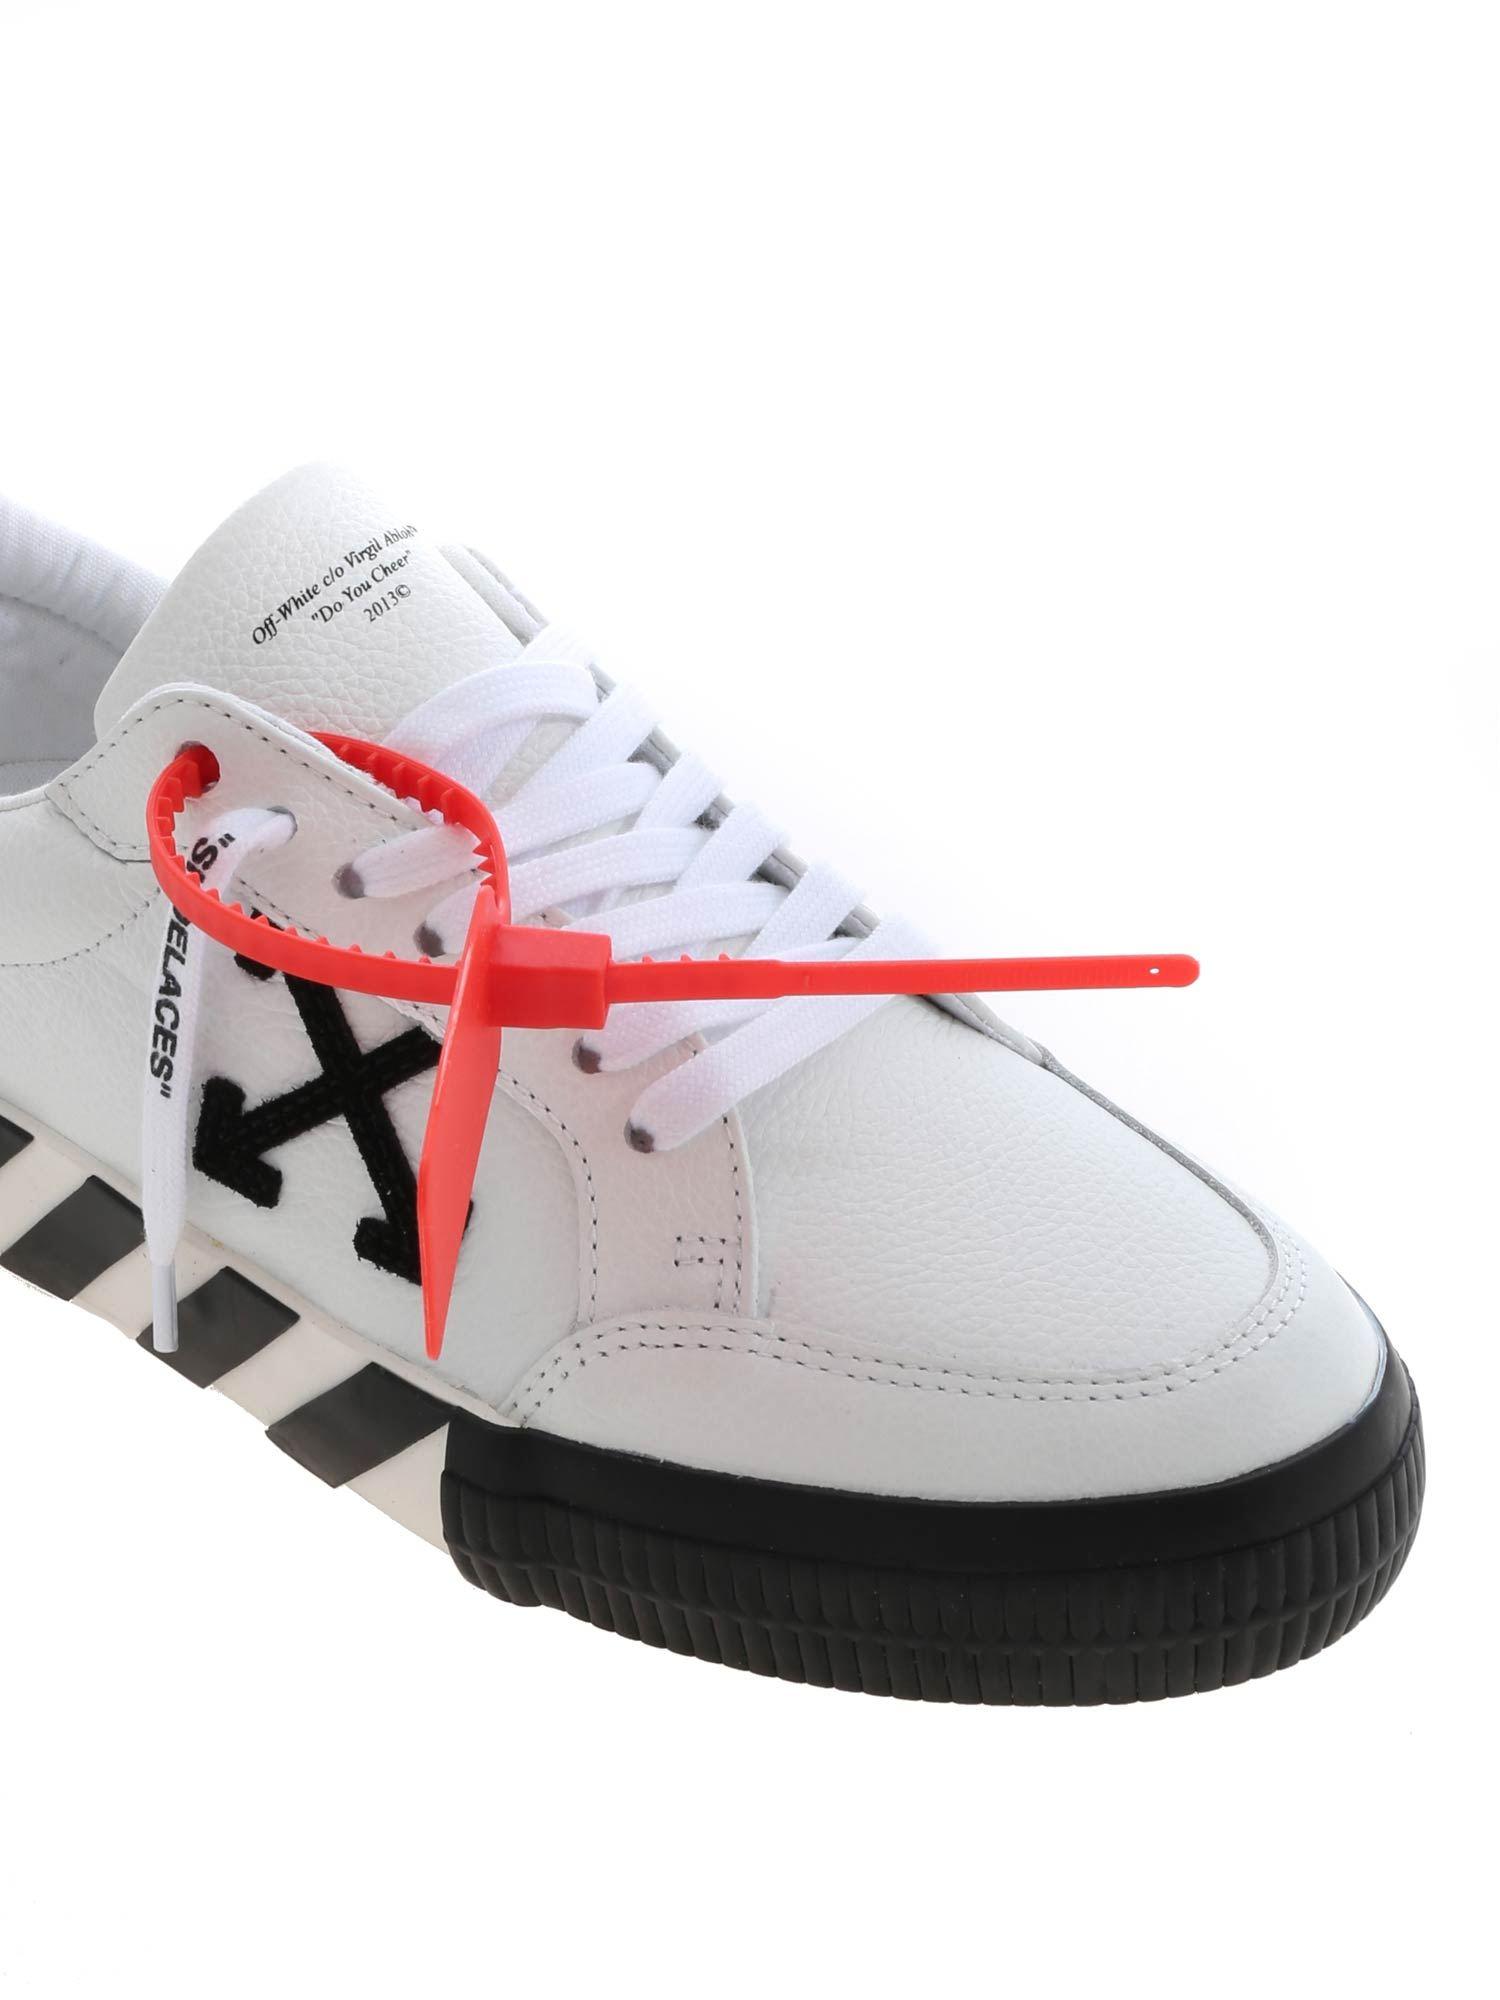 Off-White c/o Virgil Abloh Arrow Low Vulcanized Sneakers In White - Lyst